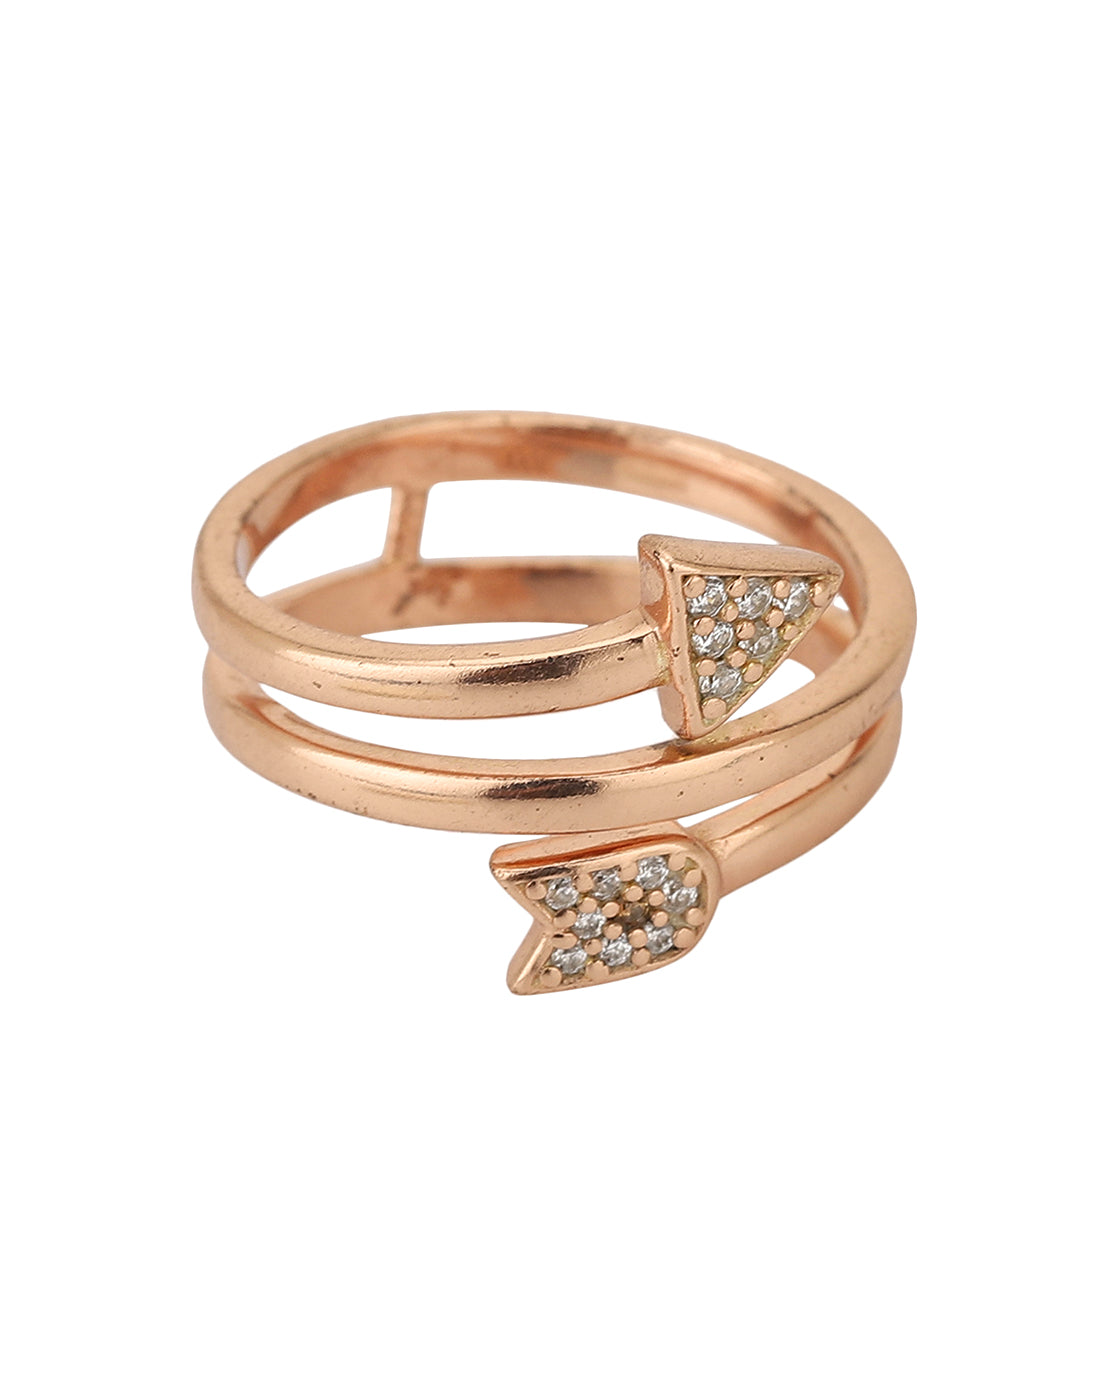 Carlton London Rose Gold Plated Cz Studded Adjustable Arrow Contemporary Finger Ring For Women